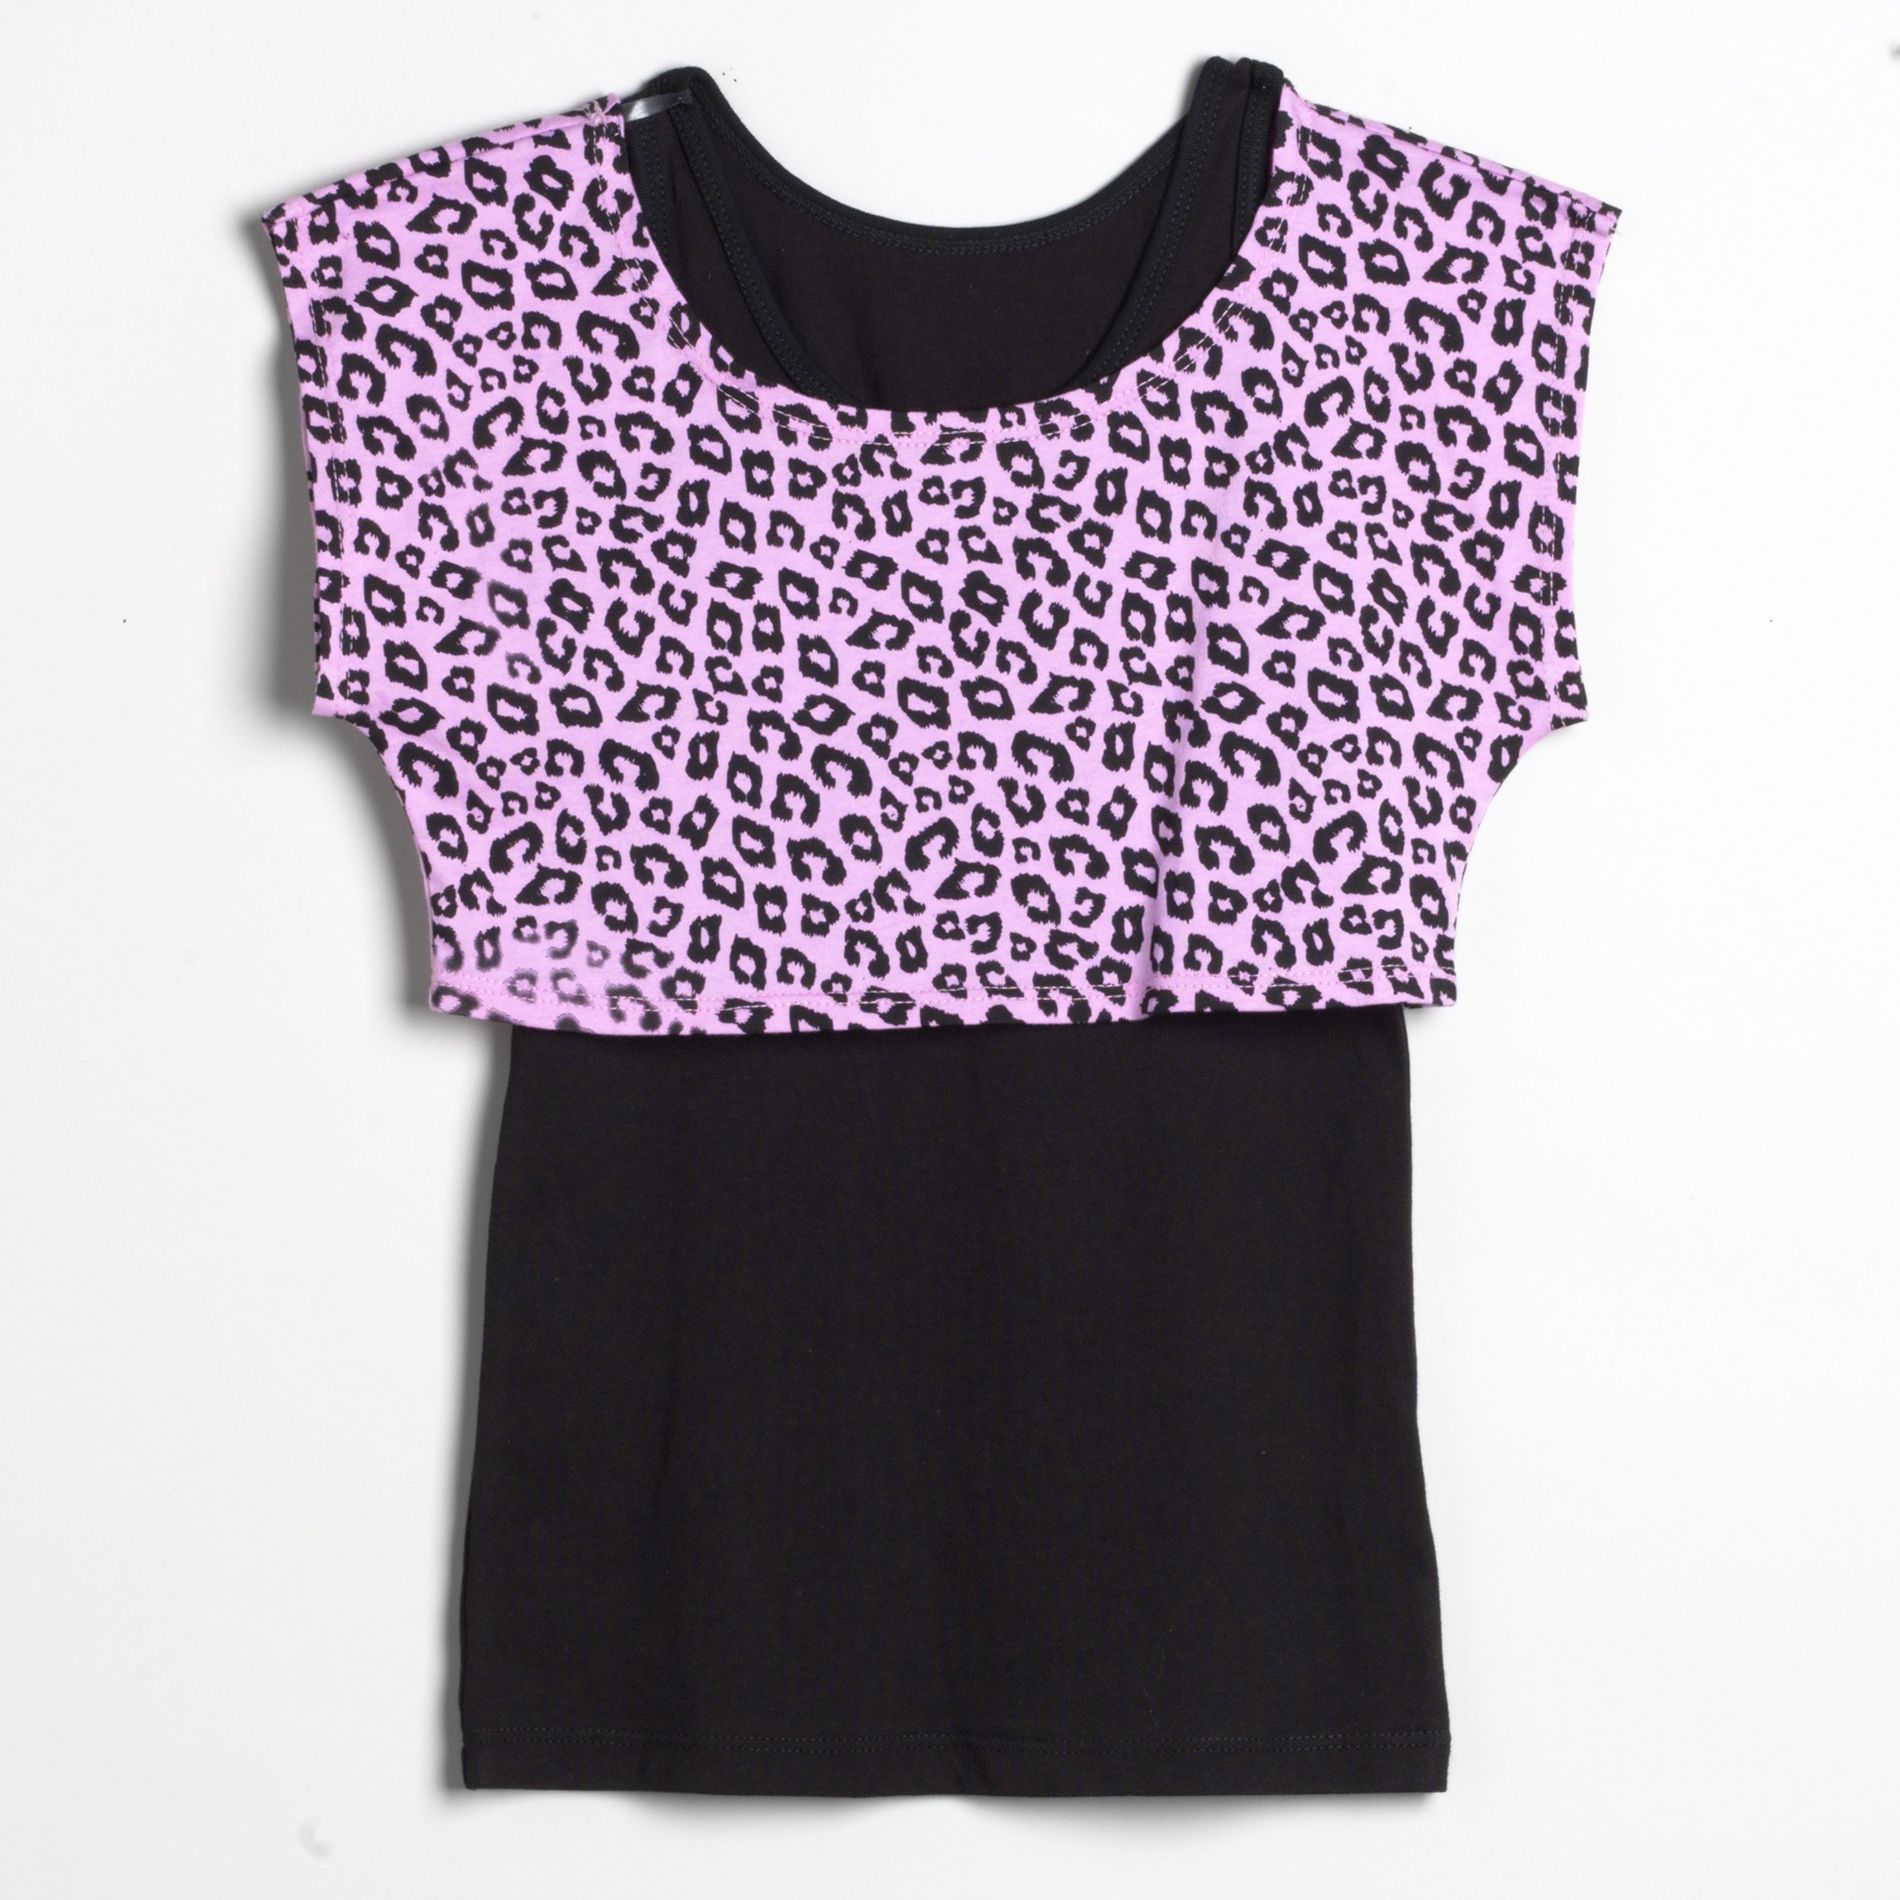 MaDonna Girl's Leopard Spots Print Layered Tank and Top